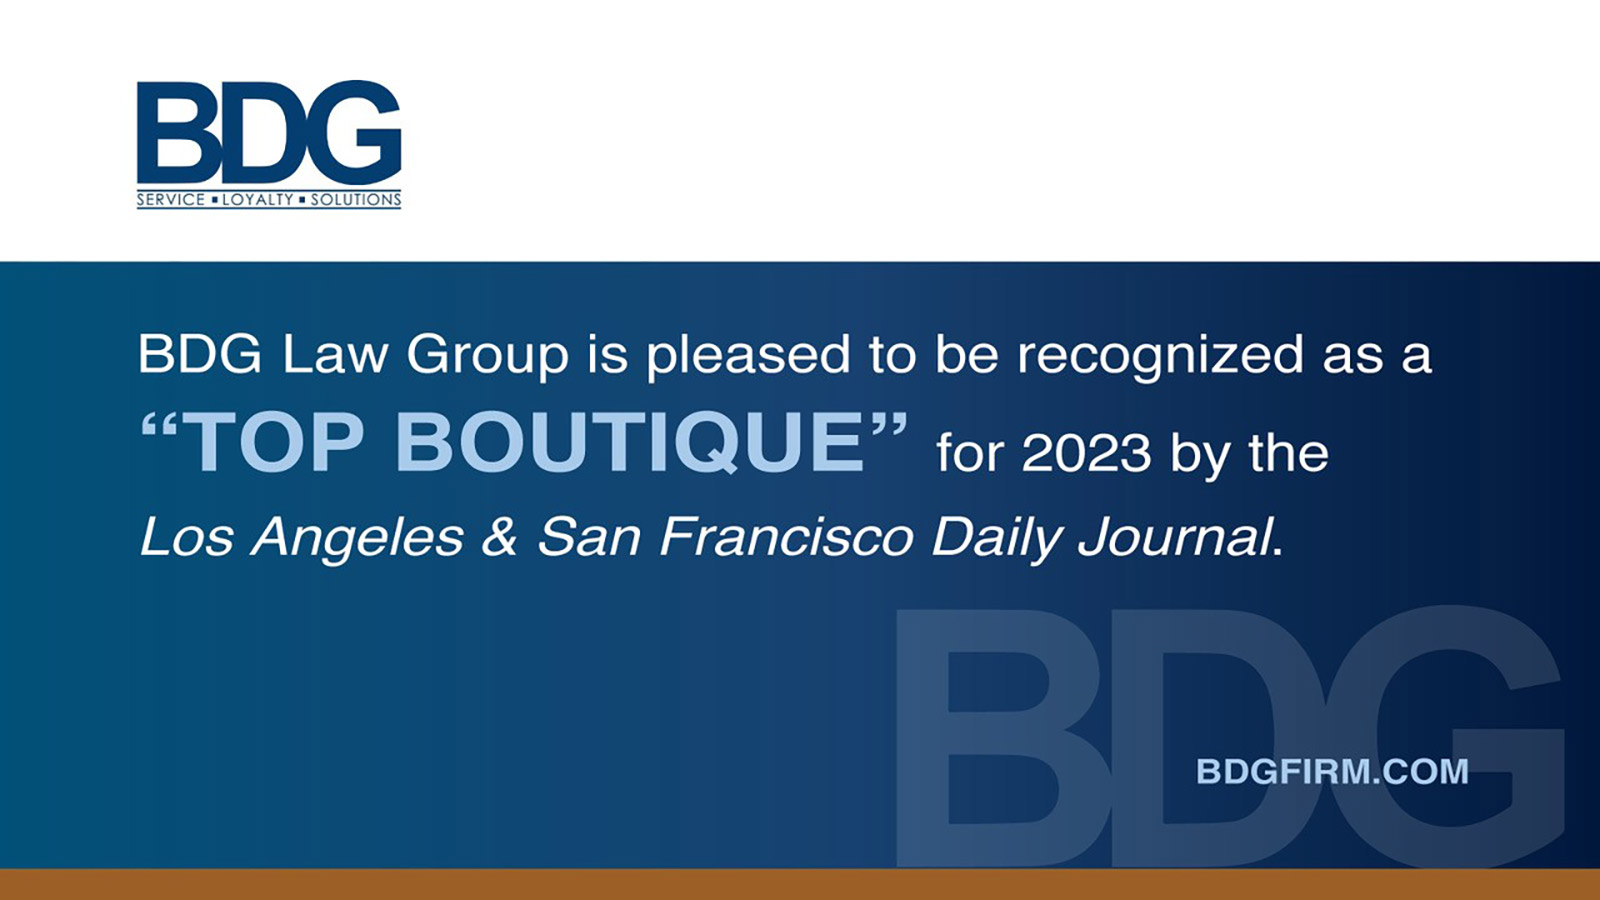 BDG law group is pleased to be recognized as a "Top Boutique" for 2023 by the Los Angeles & San Francisco Daily Journal